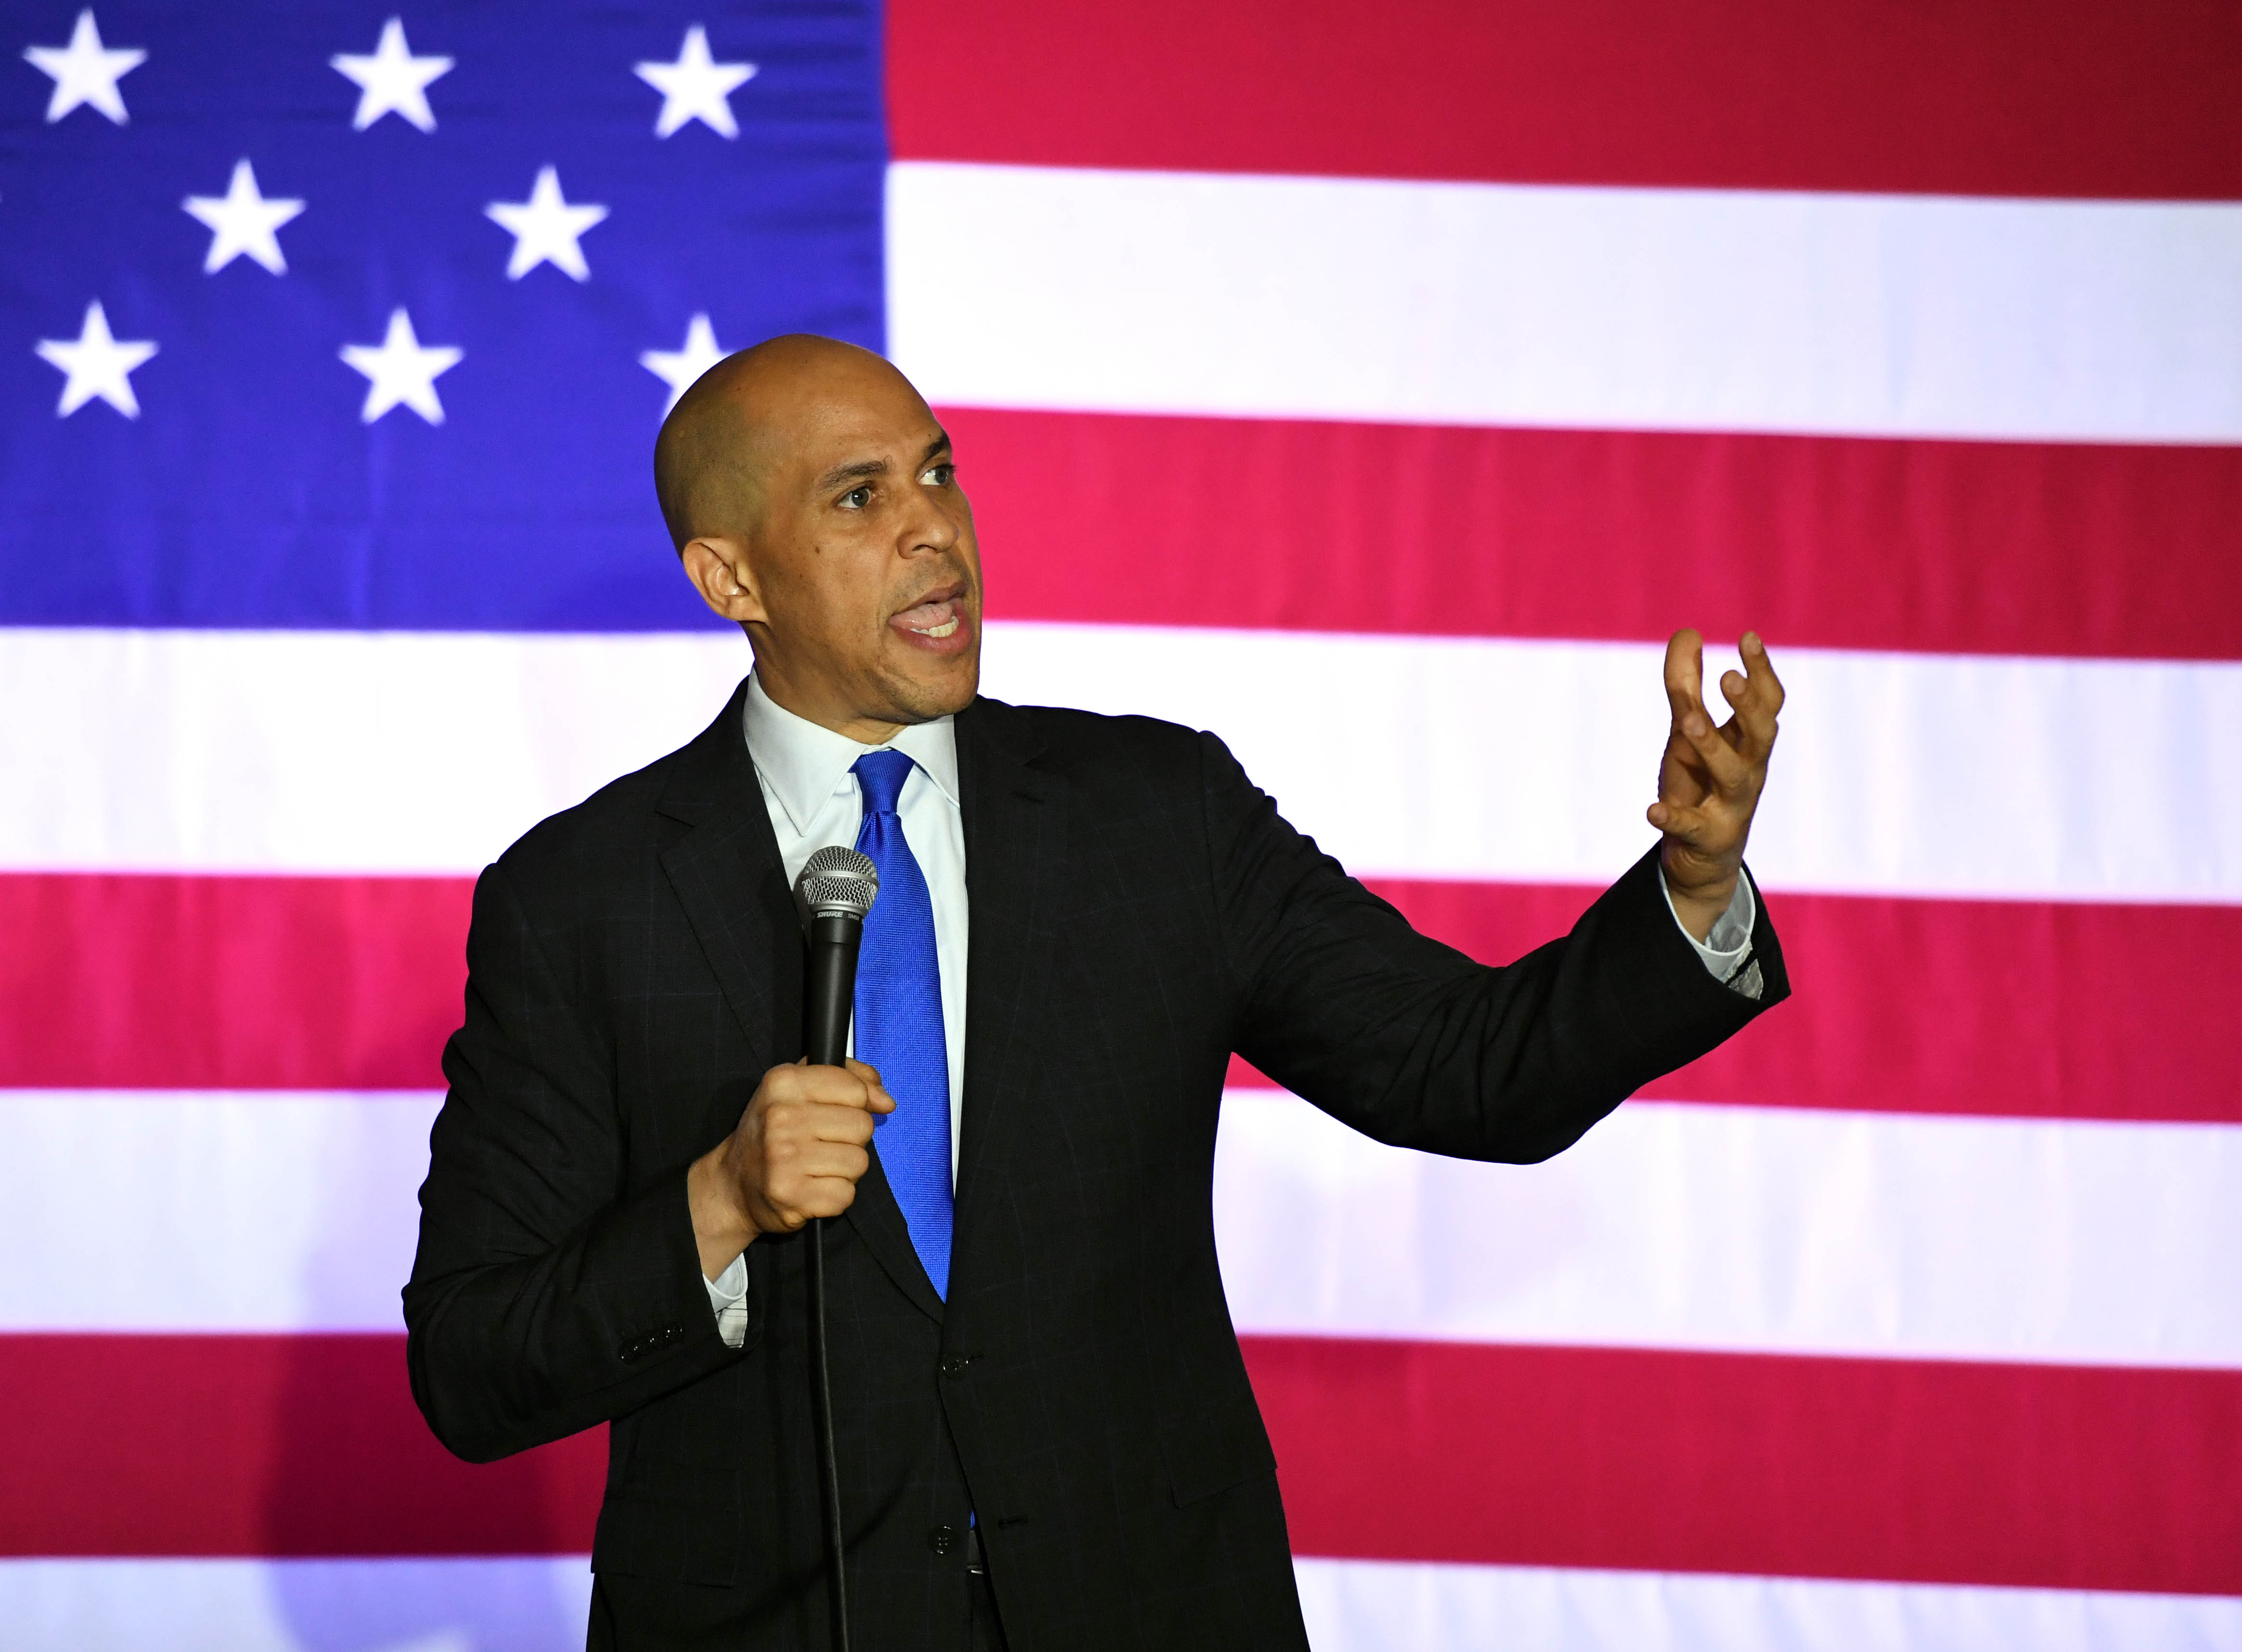 U.S. Sen. Cory Booker (D-NJ) speaks at his "Conversation with Cory" campaign event at the Nevada Partners Event Center on February 24, 2019 in North Las Vegas, Nevada. Booker is campaigning for the 2020 Democratic nomination for president. (Photo by Ethan Miller/Getty Images)